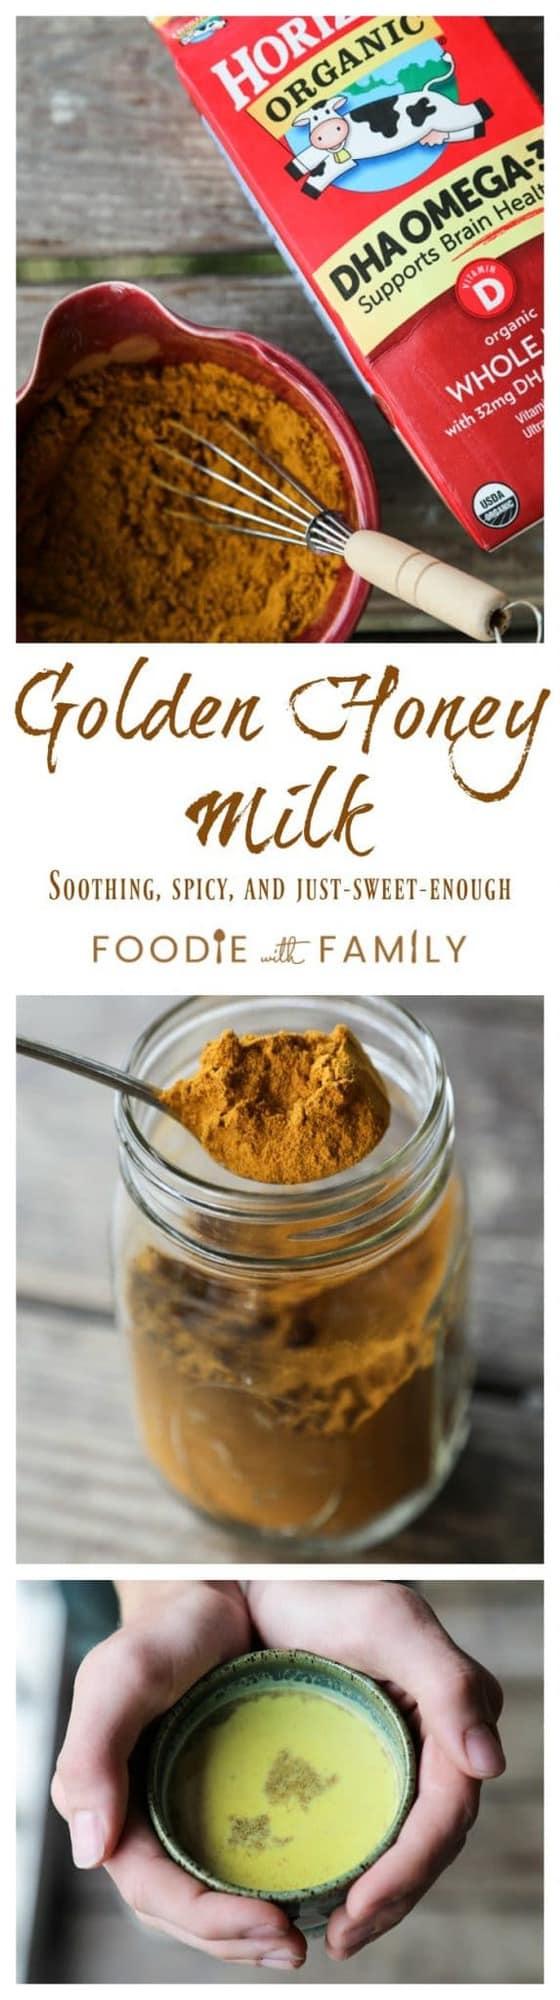 Soothing, calming, just-sweet-enough Golden Honey Milk is full of warming spices to help you wind down at the end of the day. 